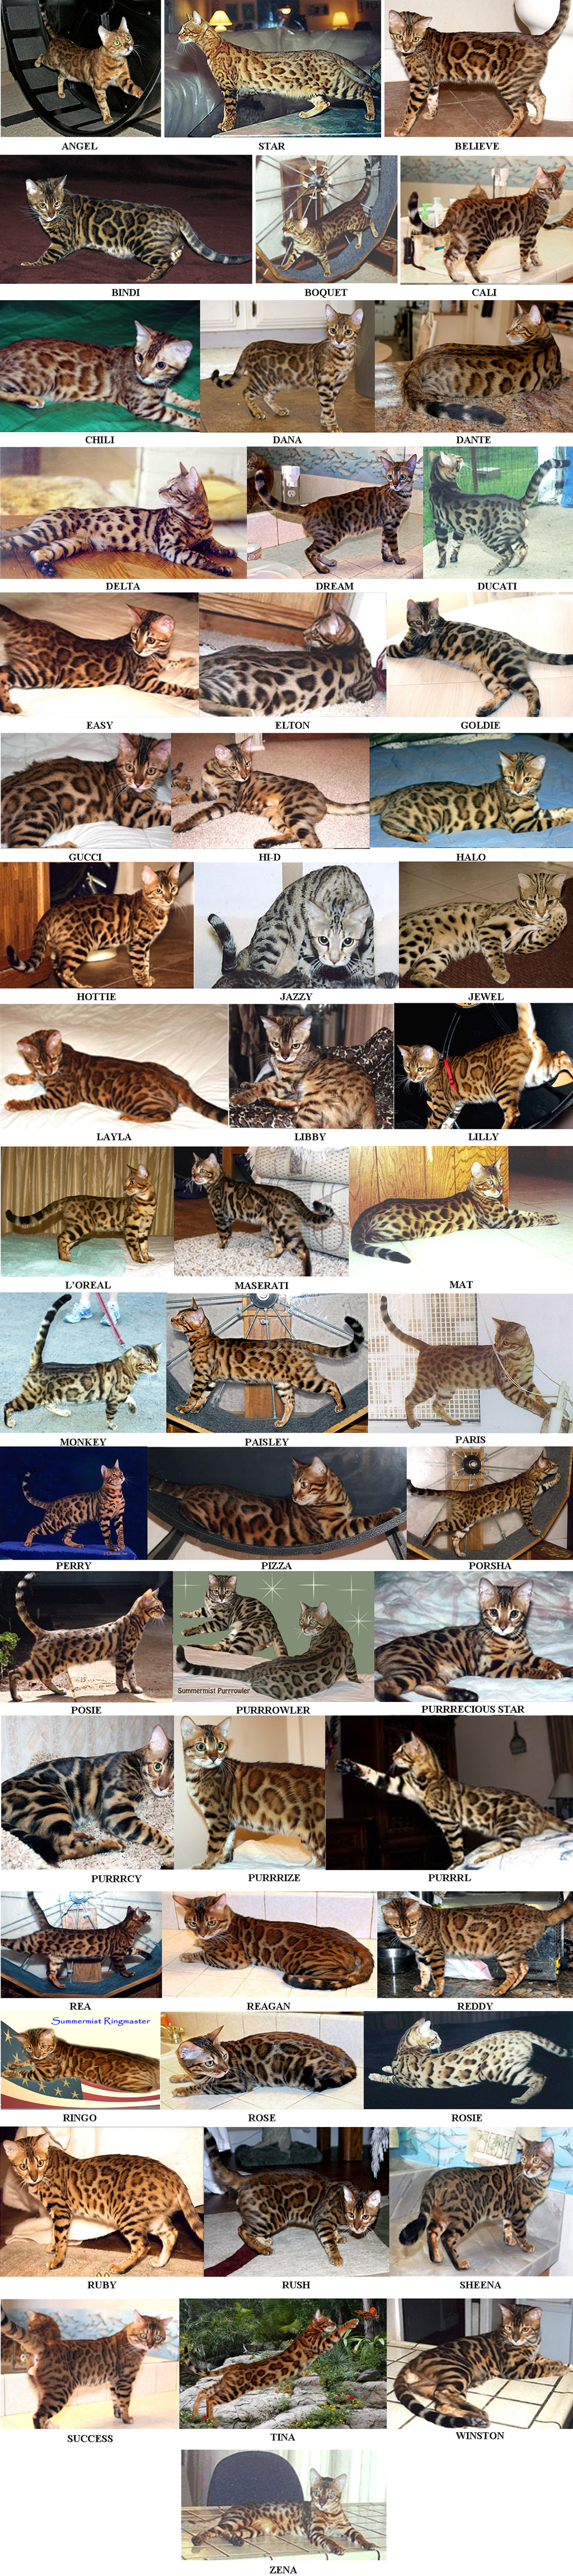 Bengal Kittens And Bengal Cats Of Summermist